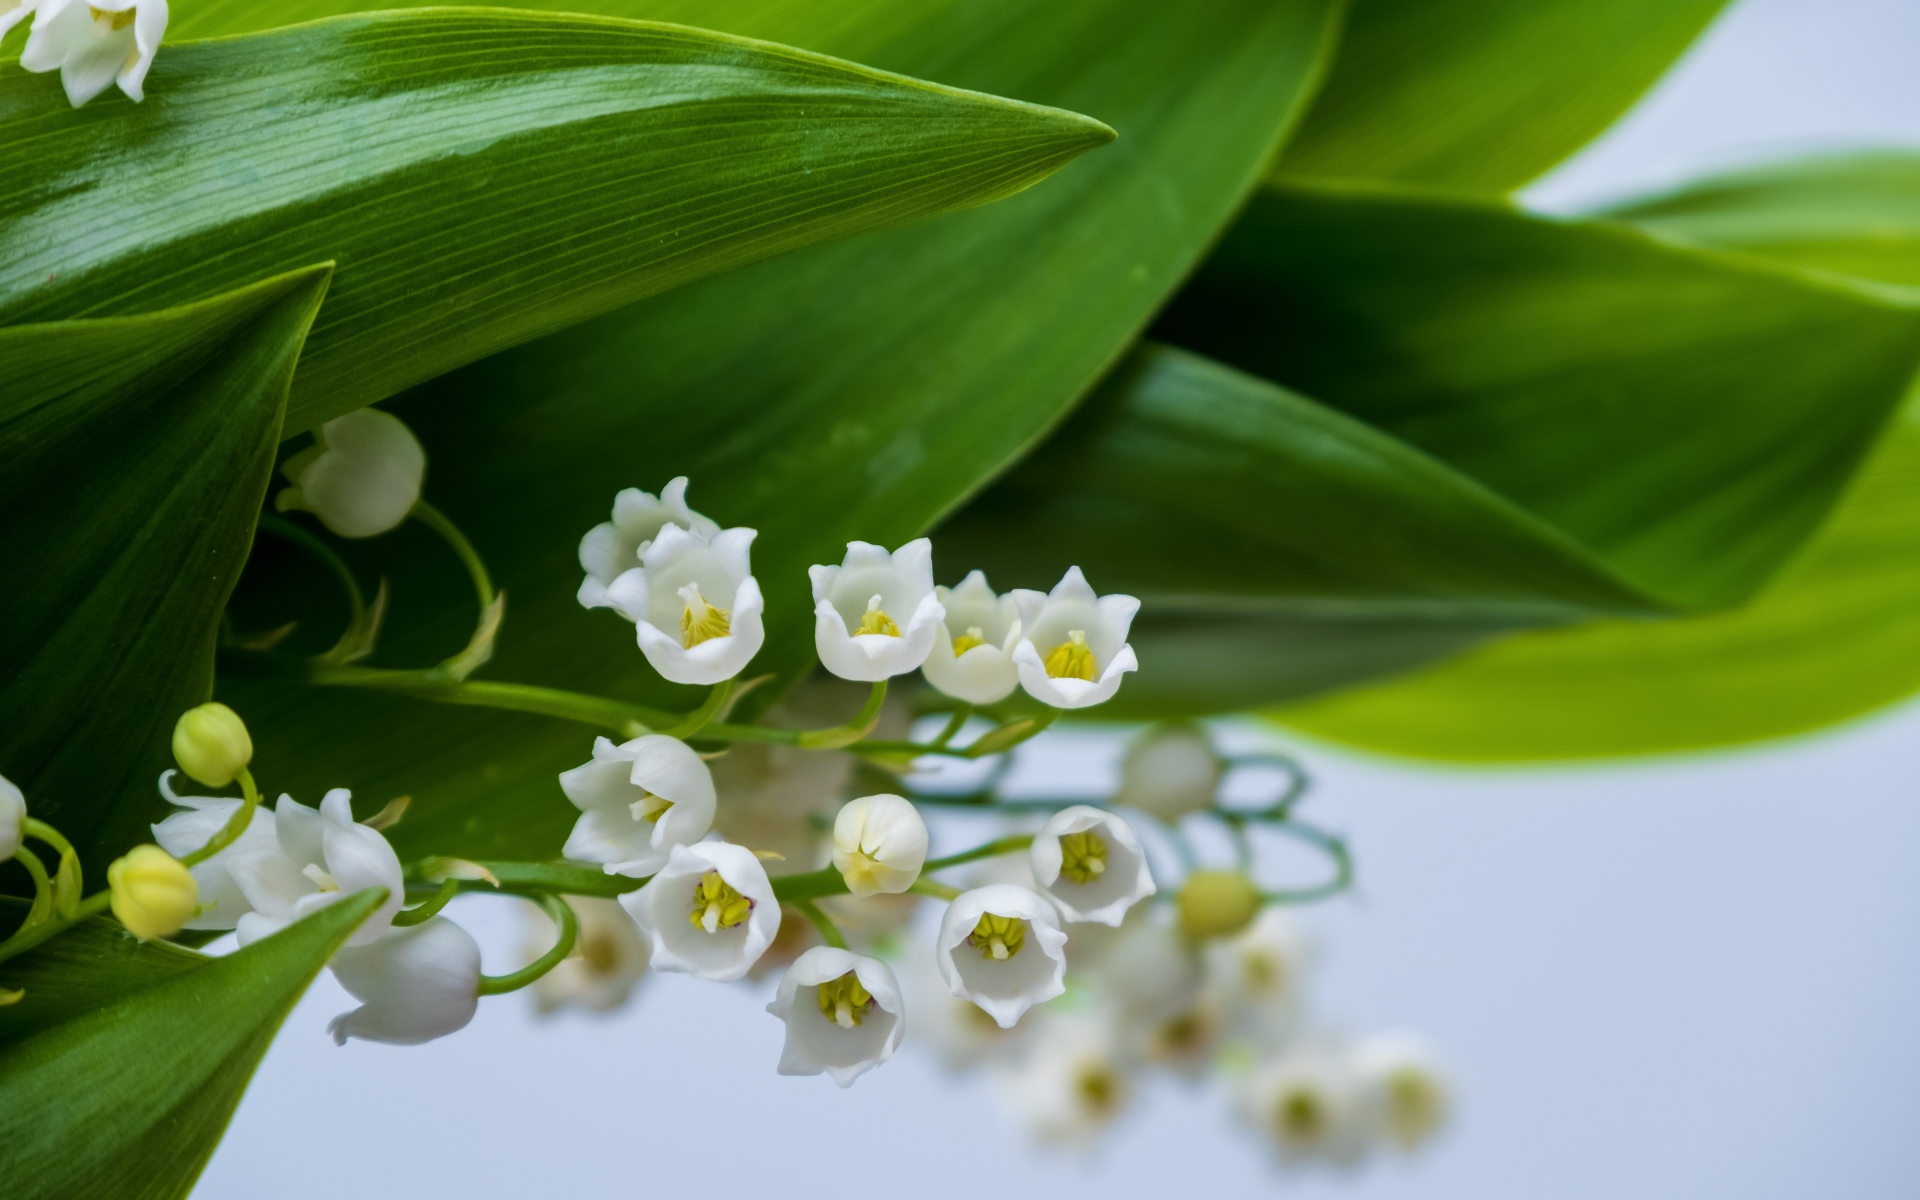 White lily of the valley flowers with green leaves